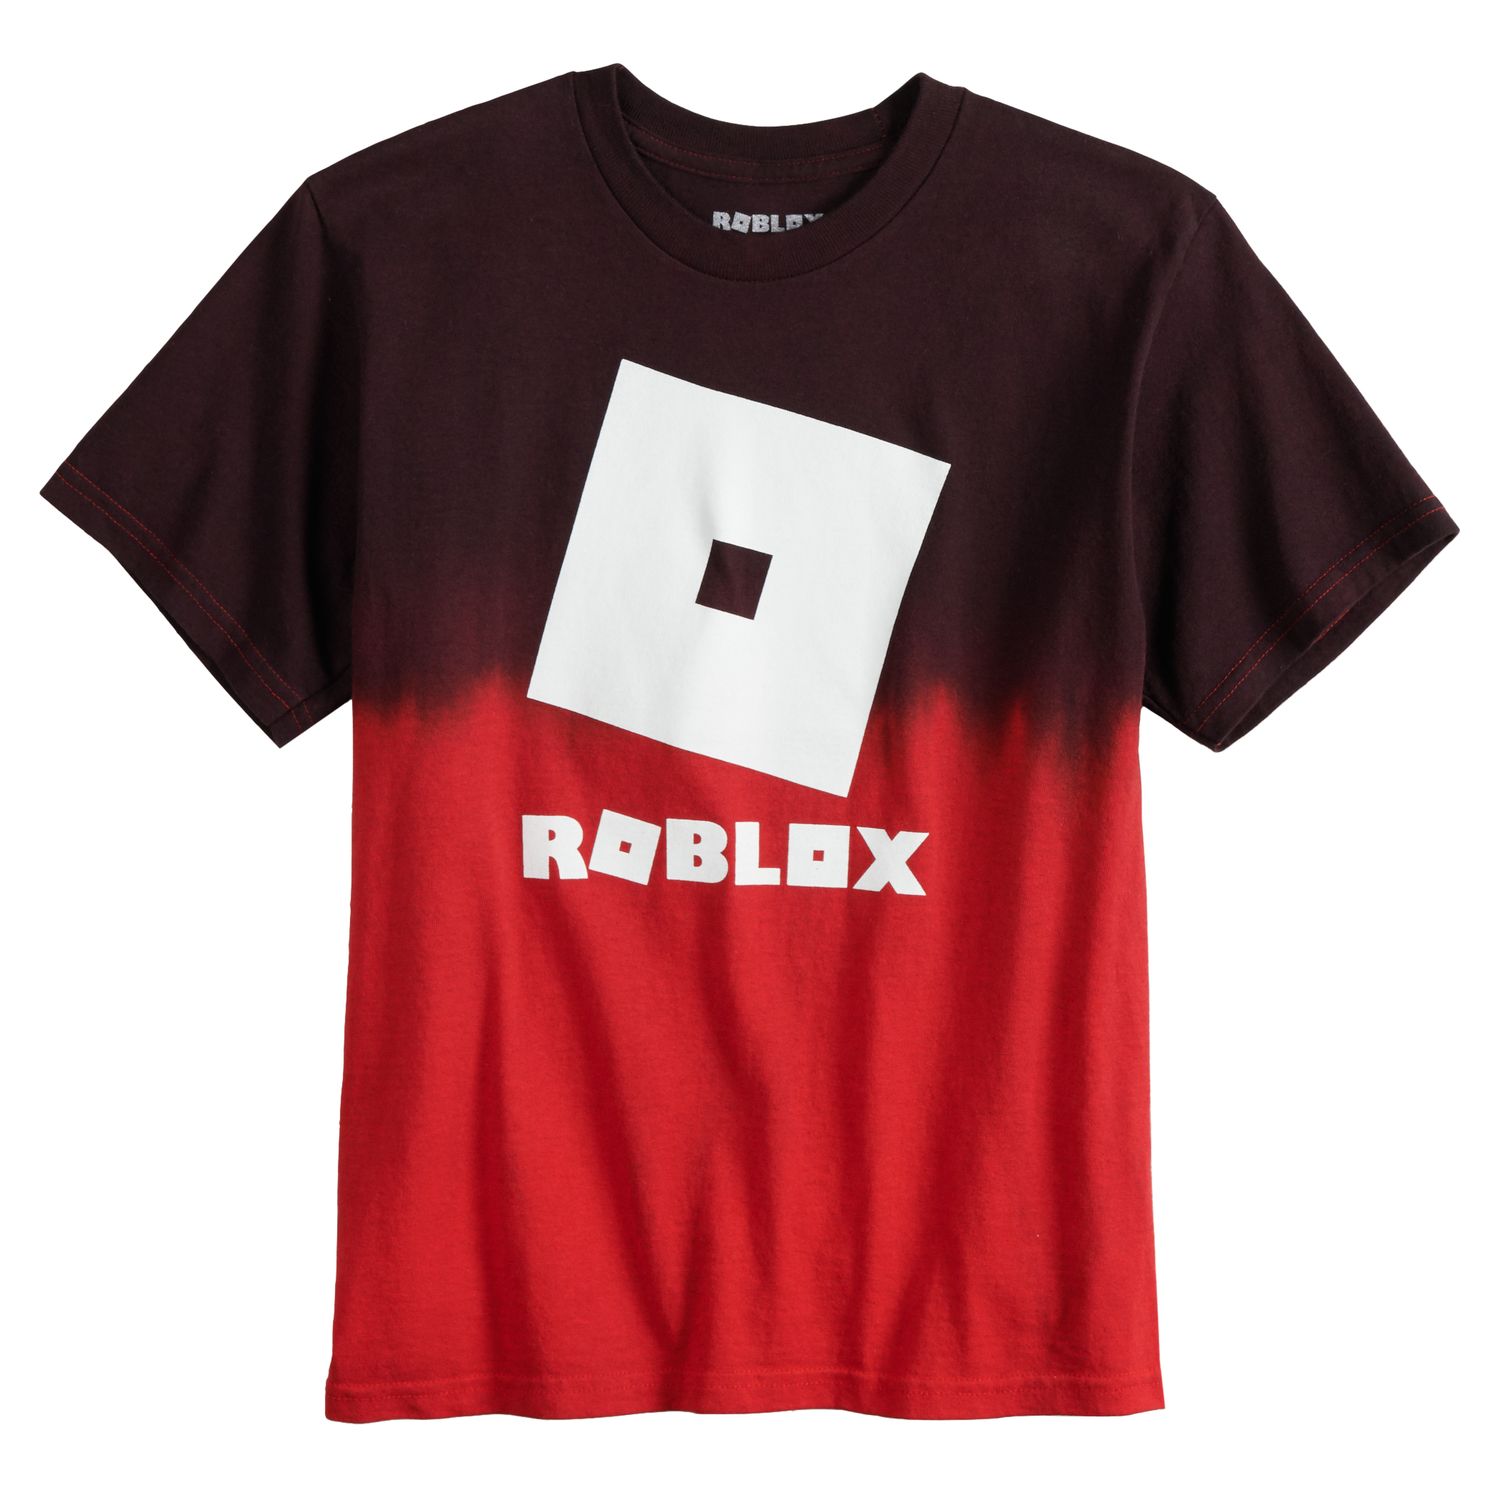 Roblox T Shirt For Boys - roblox shirts in real life